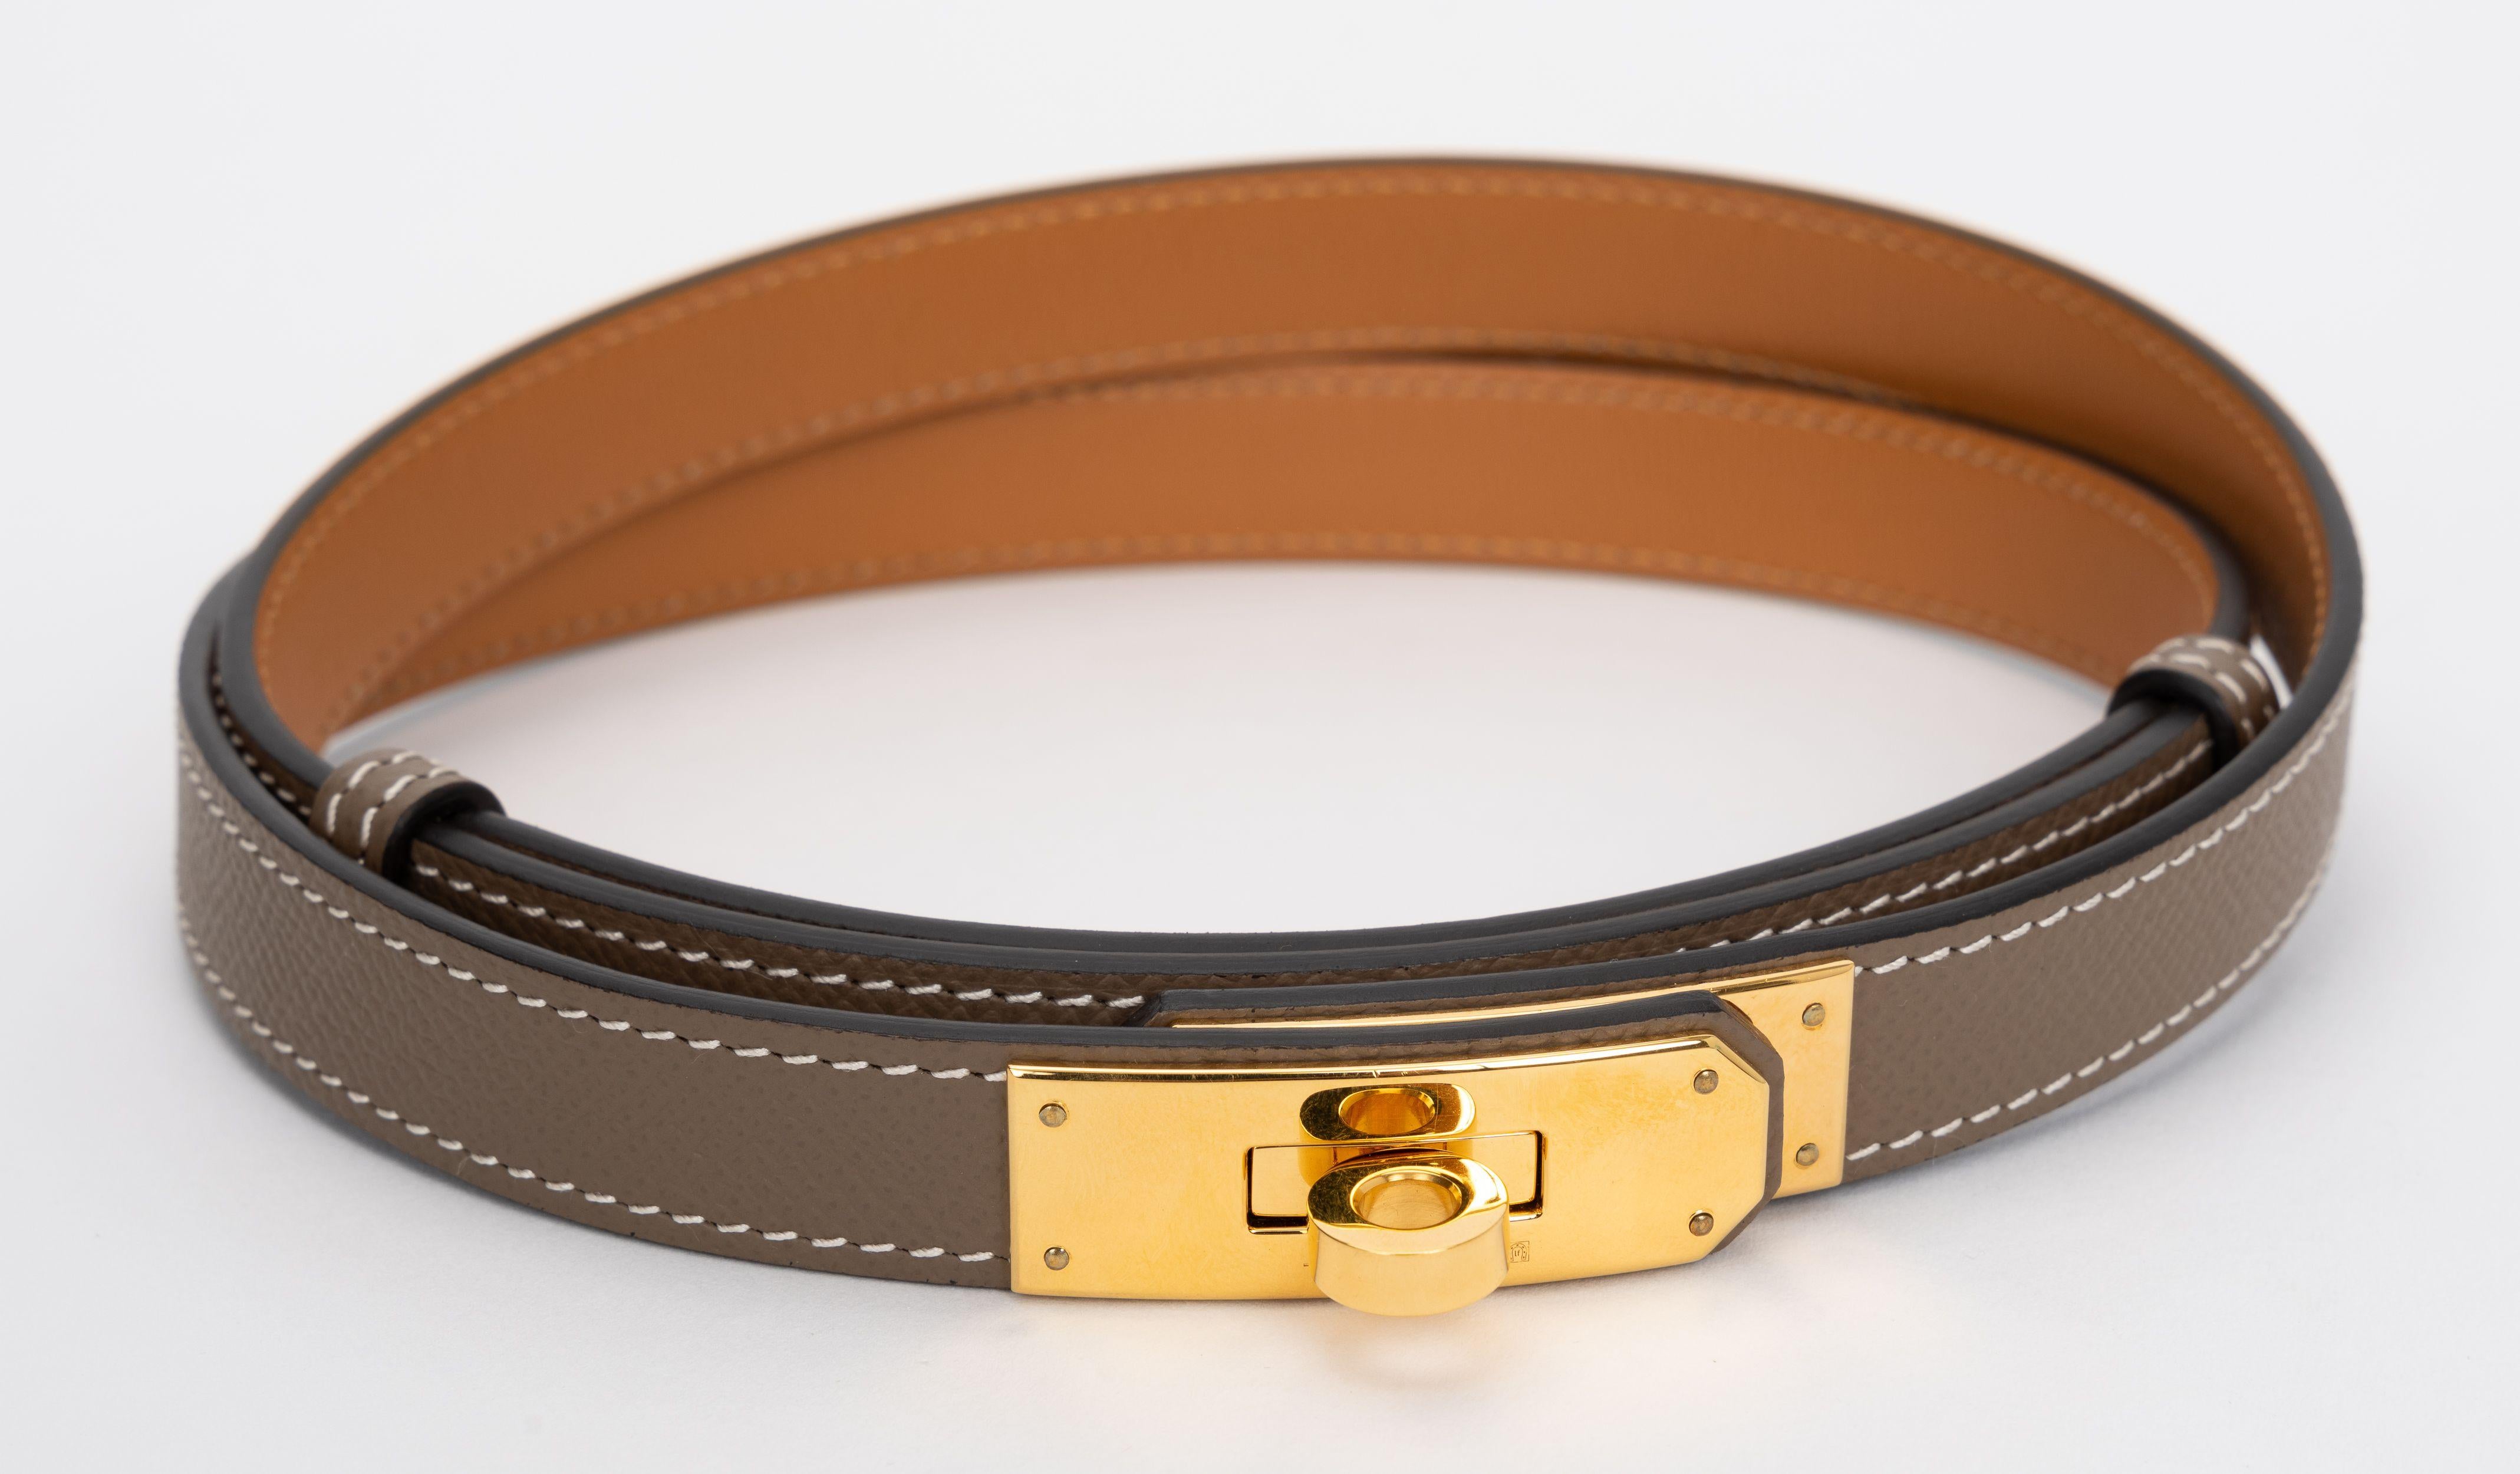 Hermes Etoupe Epsom Gold Kelly Belt In Excellent Condition For Sale In West Hollywood, CA